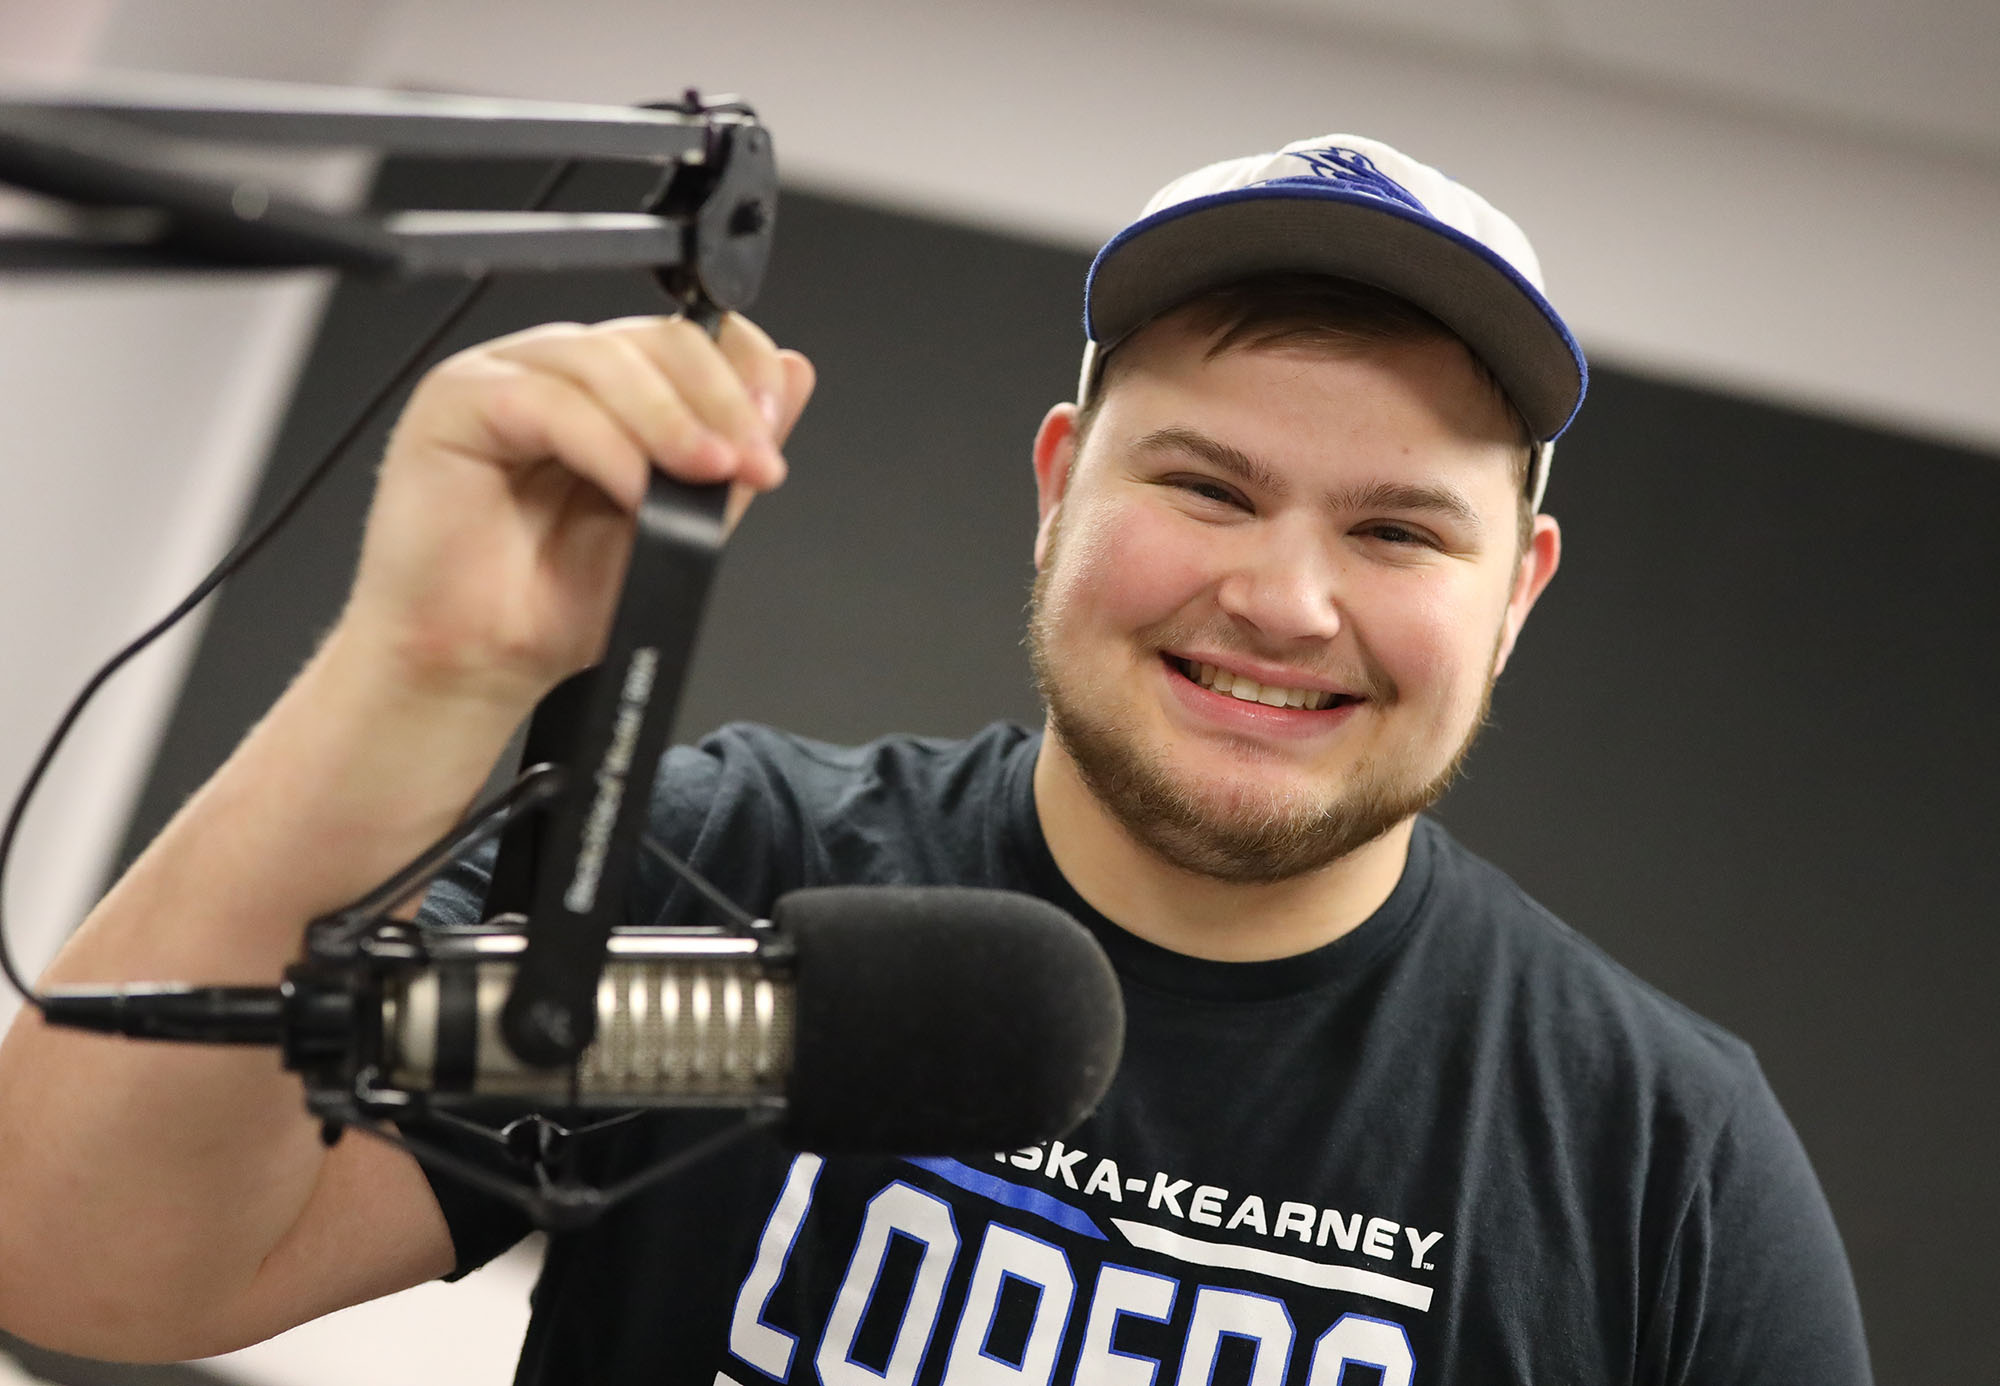 Jacob Roth, a junior from Milford, calls numerous UNK athletic events as a sports broadcaster for the campus radio station, KLPR 91.1 FM. He also hosts “The Jacob Roth Show,” which airs 11 a.m. Tuesdays. (Photo by Corbey R. Dorsey, UNK Communications)